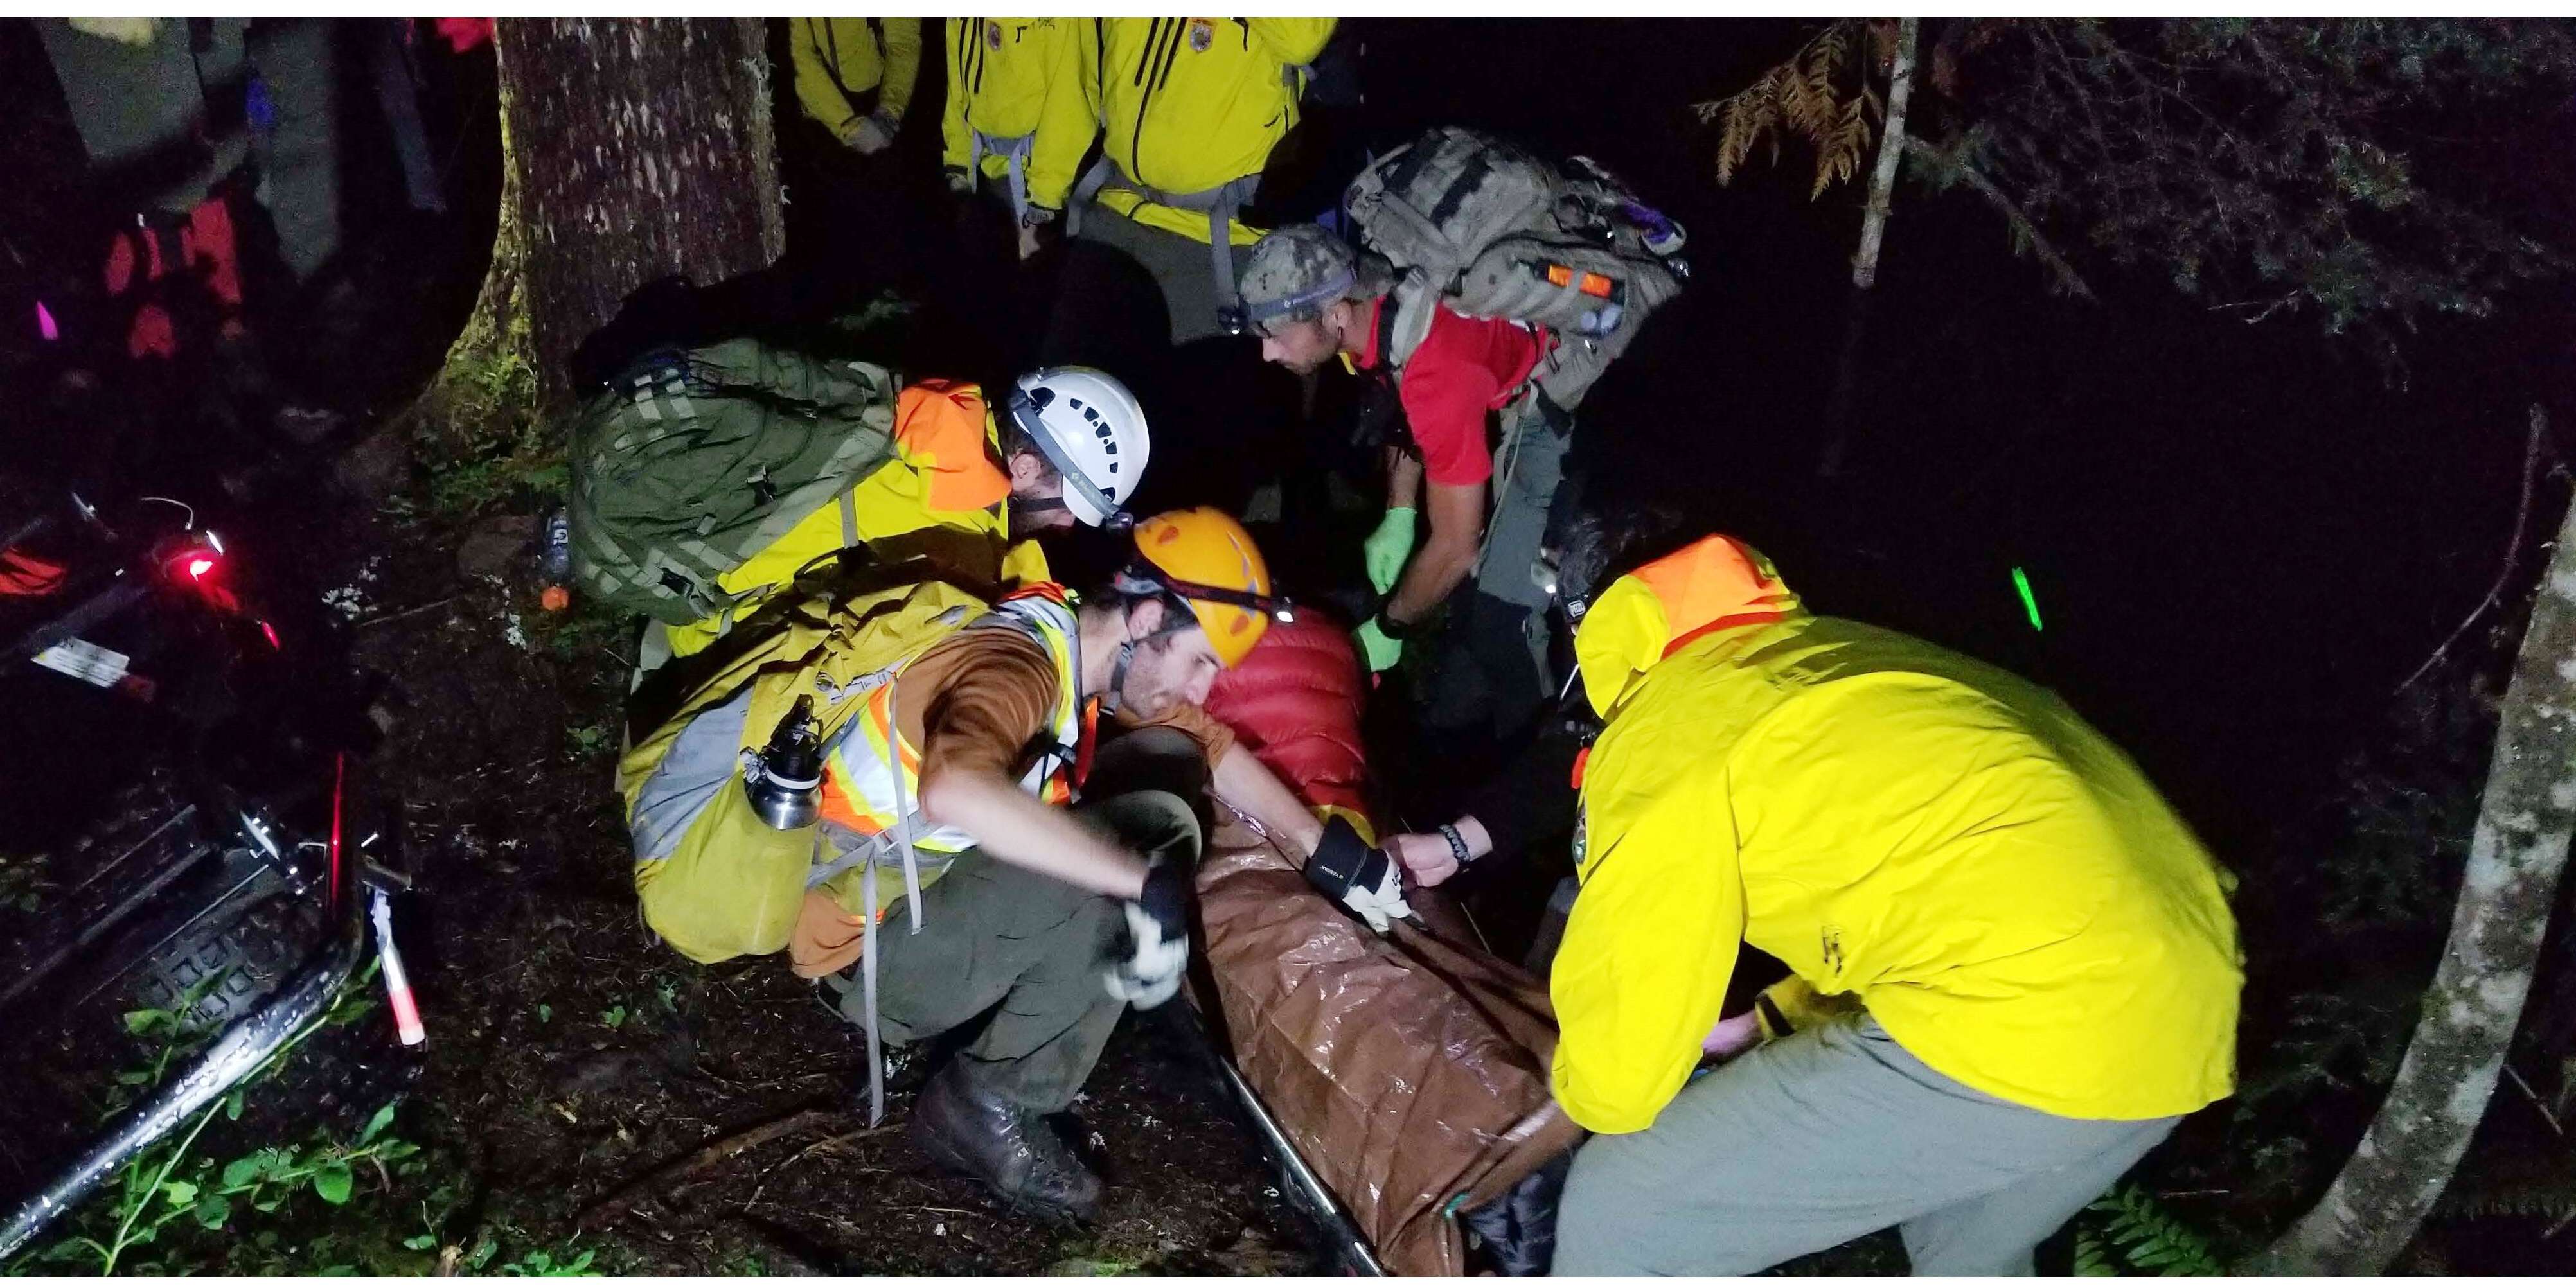 Rescue workers preparing a patient on a litter.